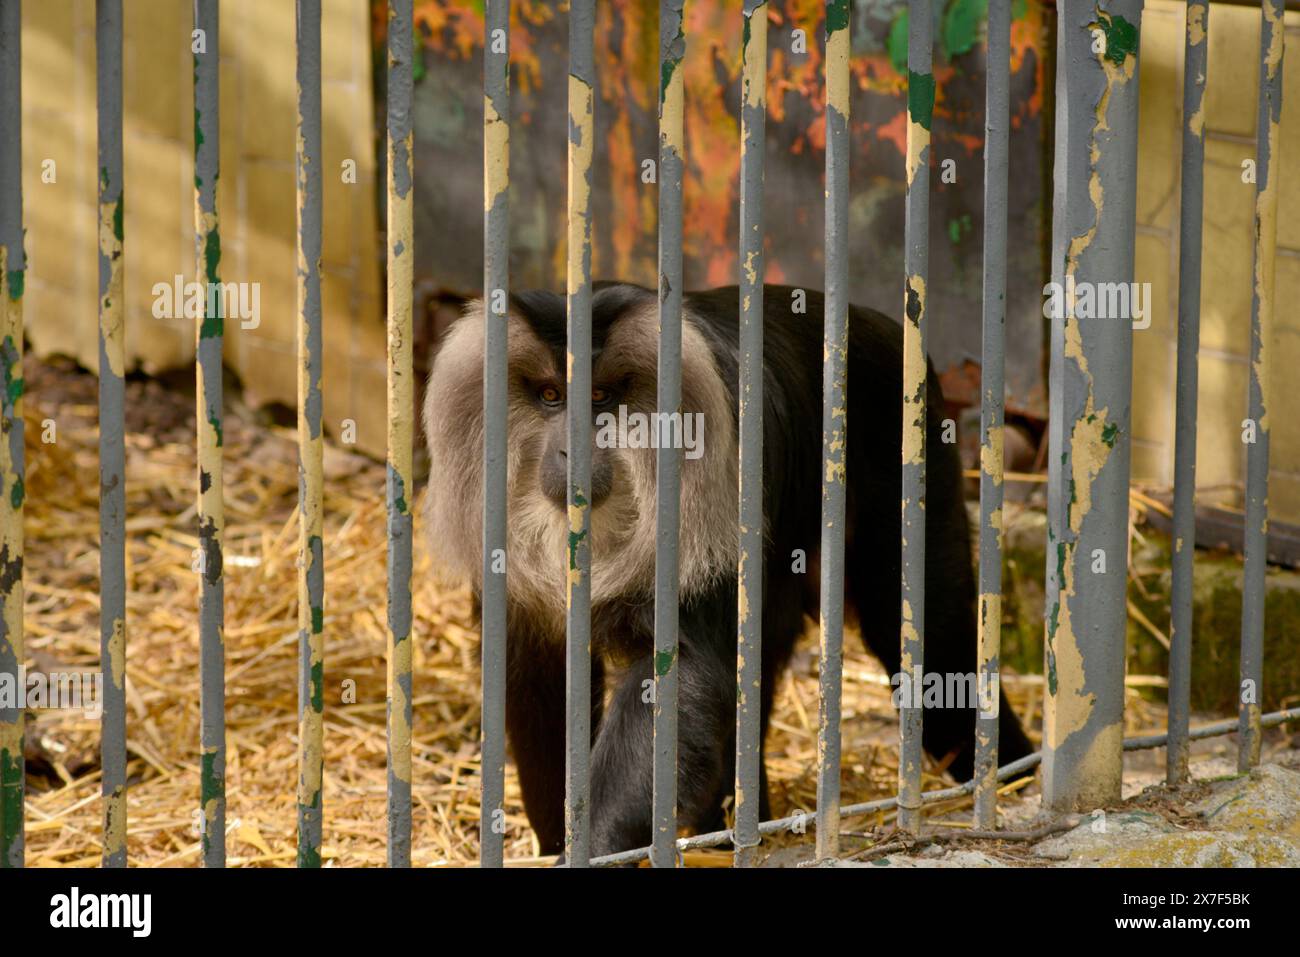 Lion-tailed macaque Macaca silenus or the wanderoo endangered species of primate in cage behind bars in Sofia Zoo, Sofia Bulgaria, Eastern Europe, EU Stock Photo